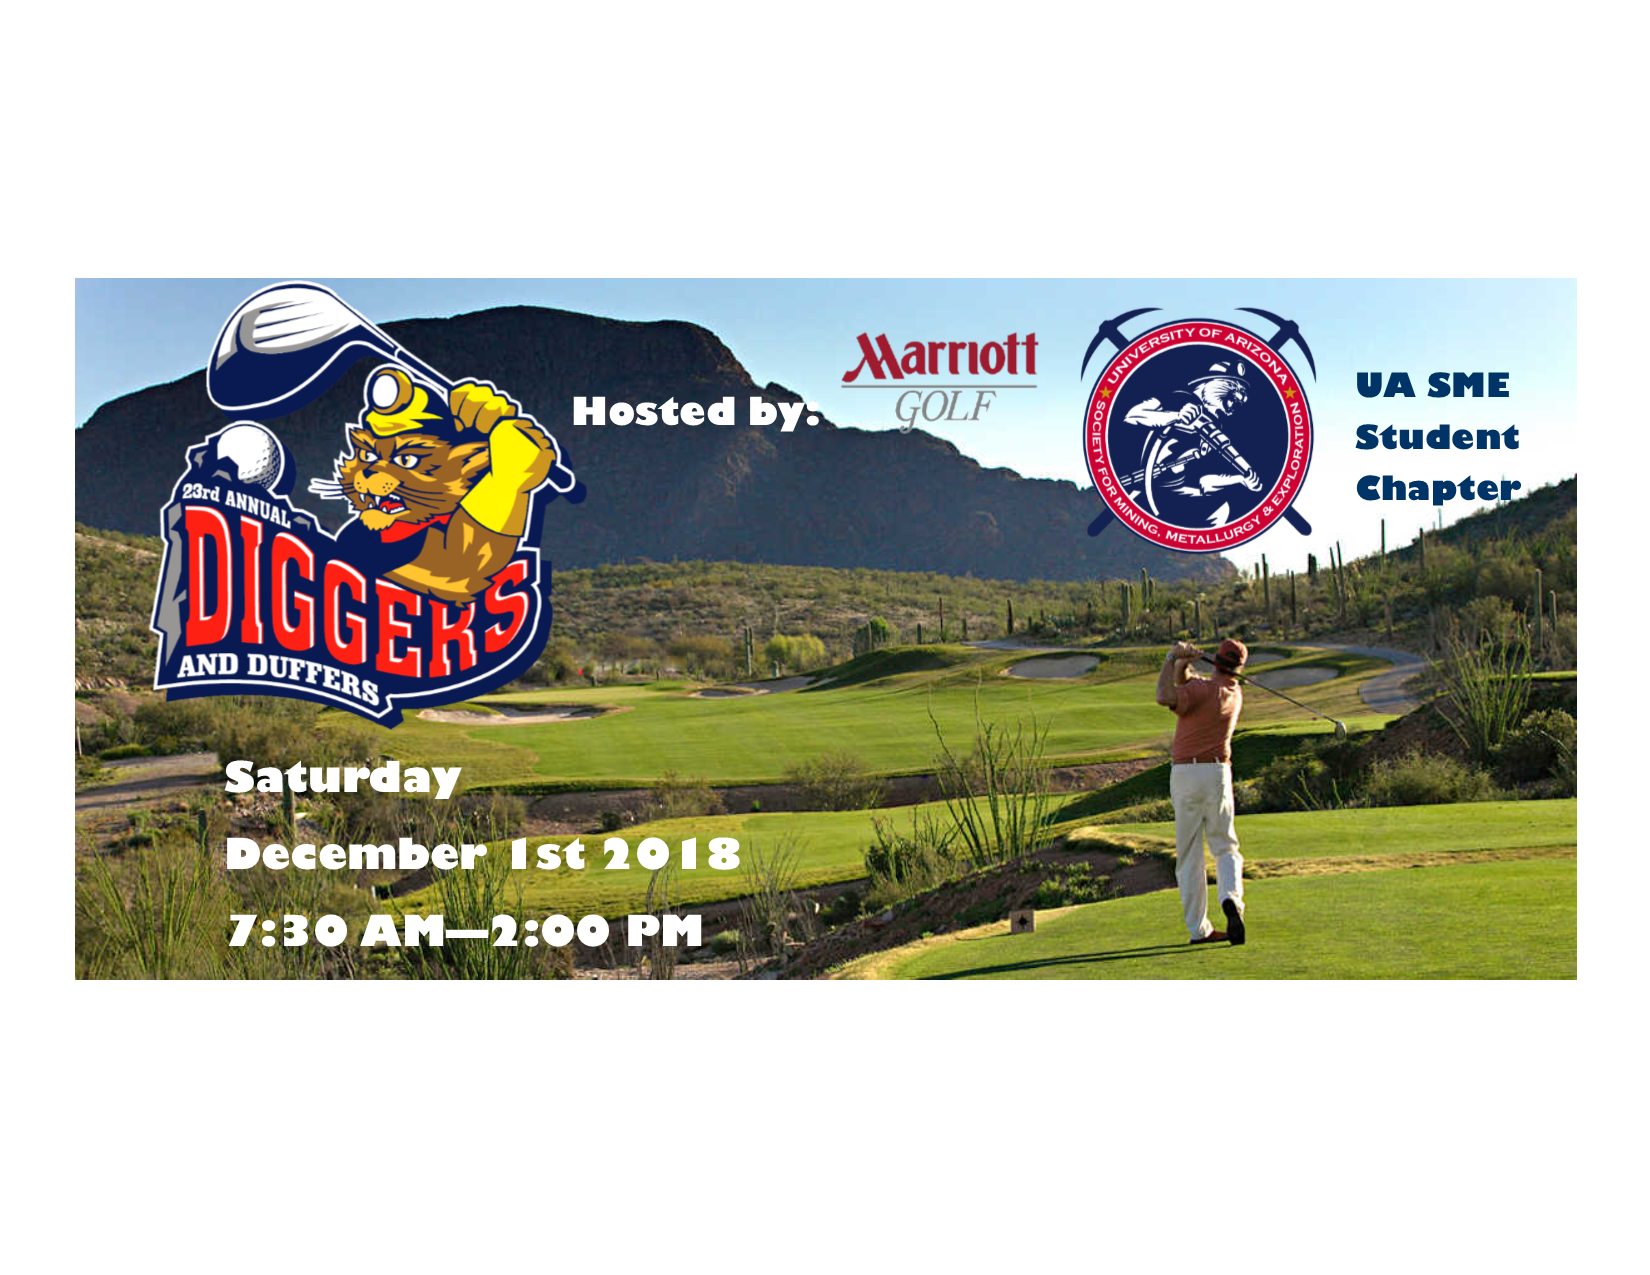 23rd Diggers and Duffers Golf Tournament